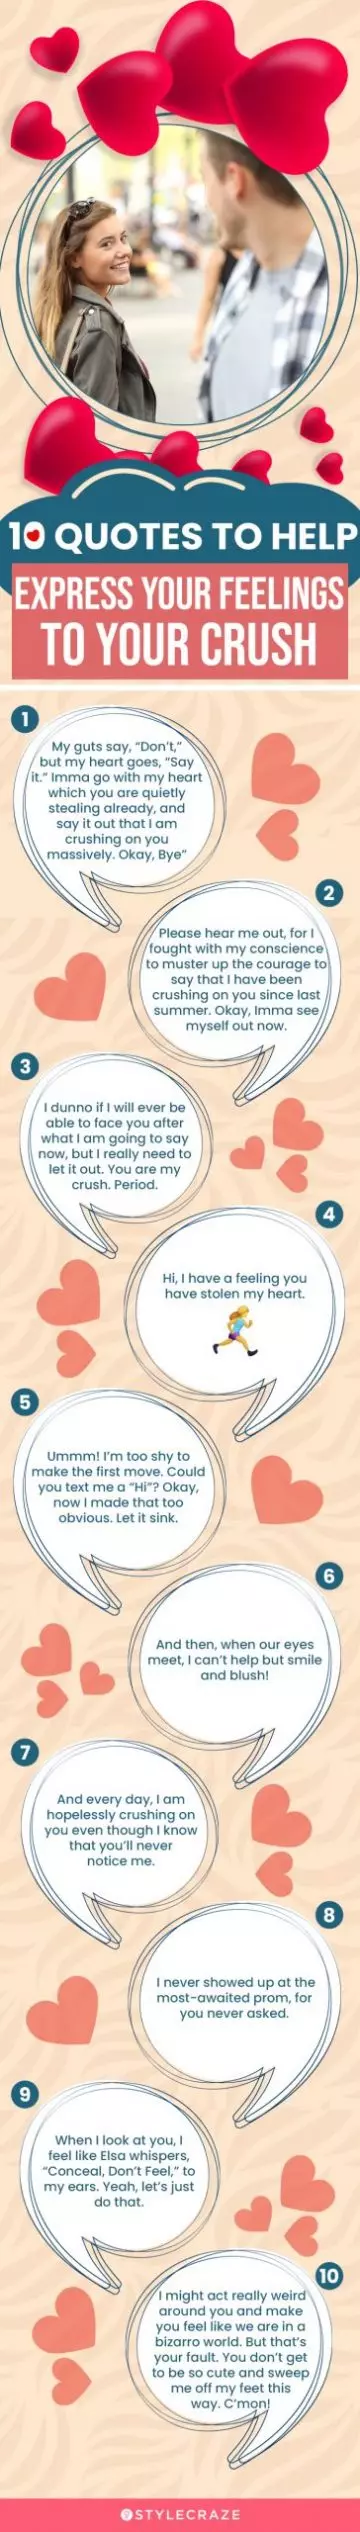 10 quotes to help express your feelings to your crush (infographic)